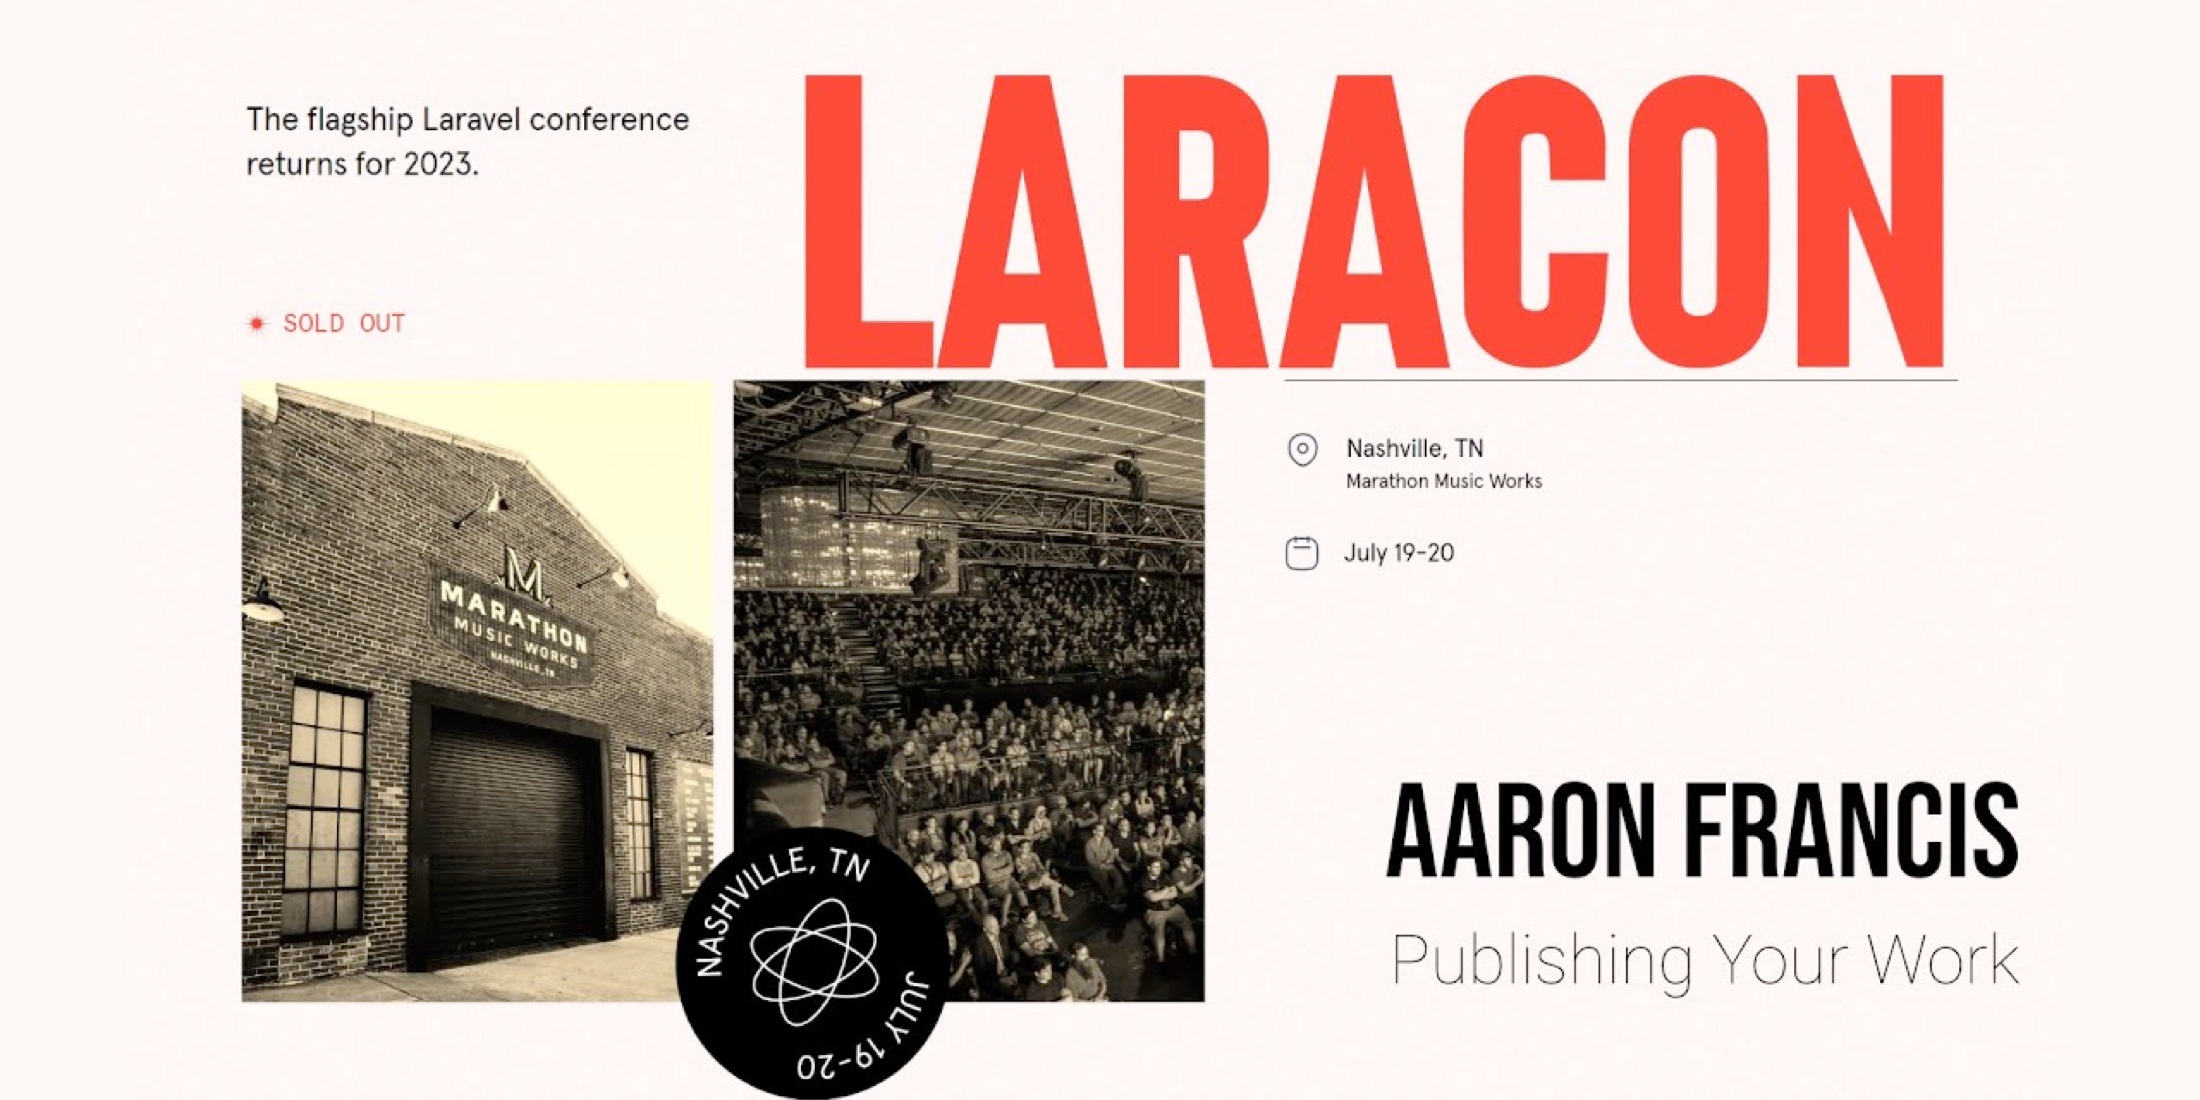 Aaron Francis's "Publishing Your Work" talk from Laracon image